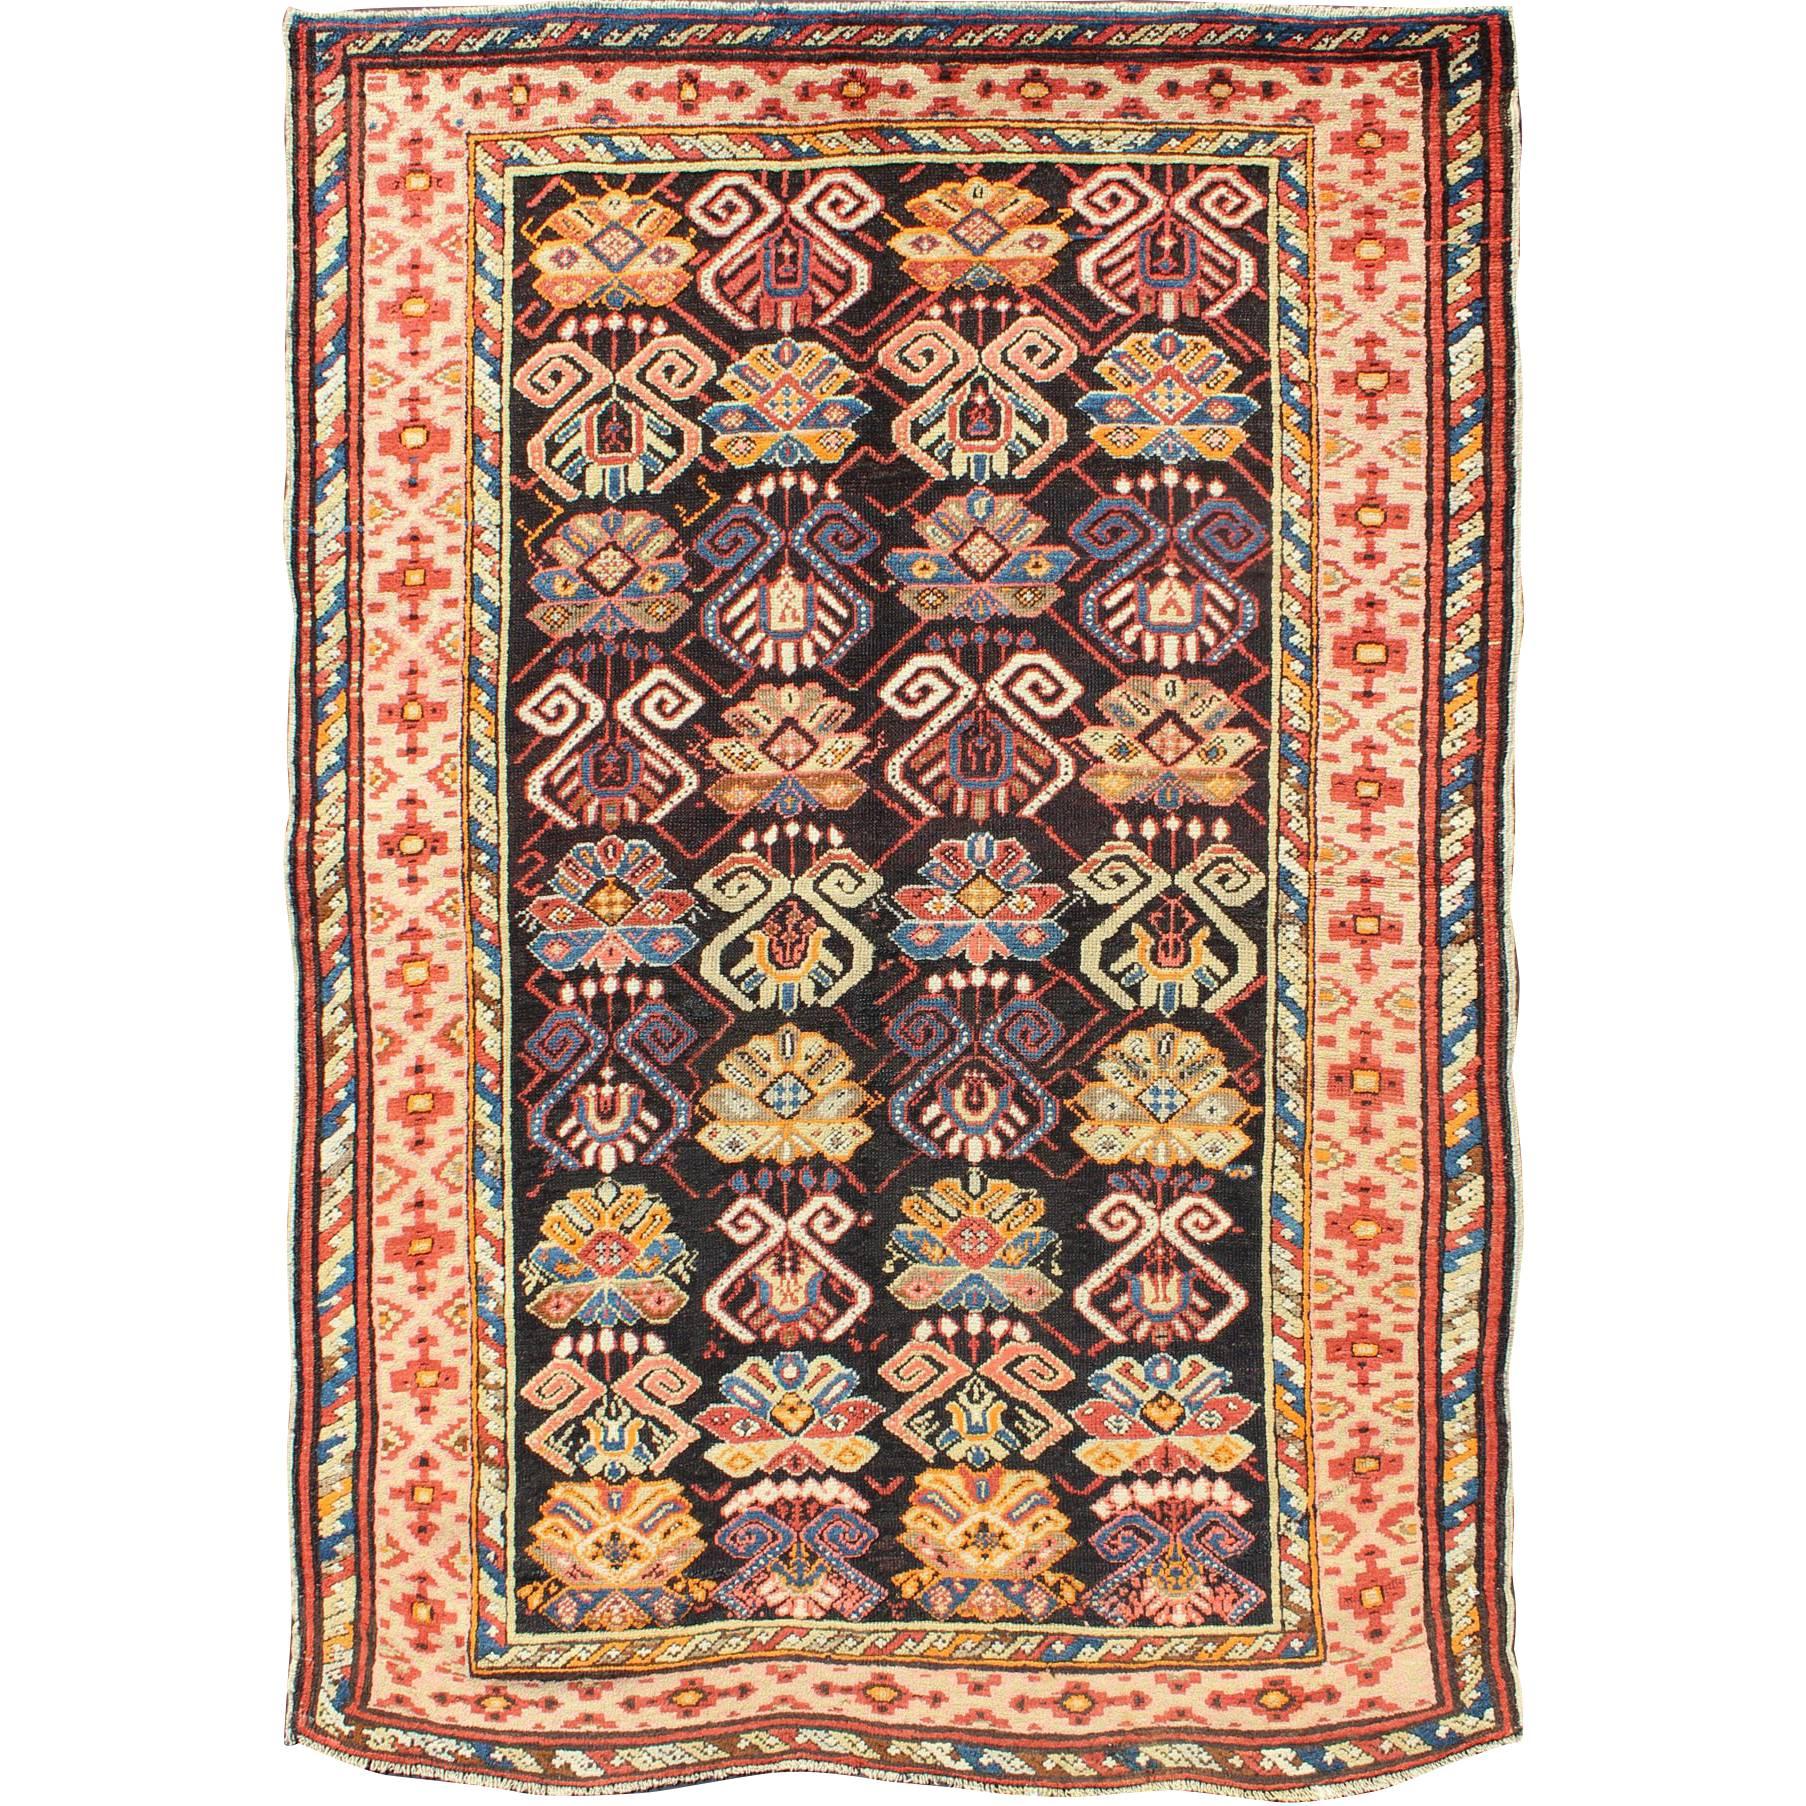 Colorful Antique Caucasian Rug with All-Over Design